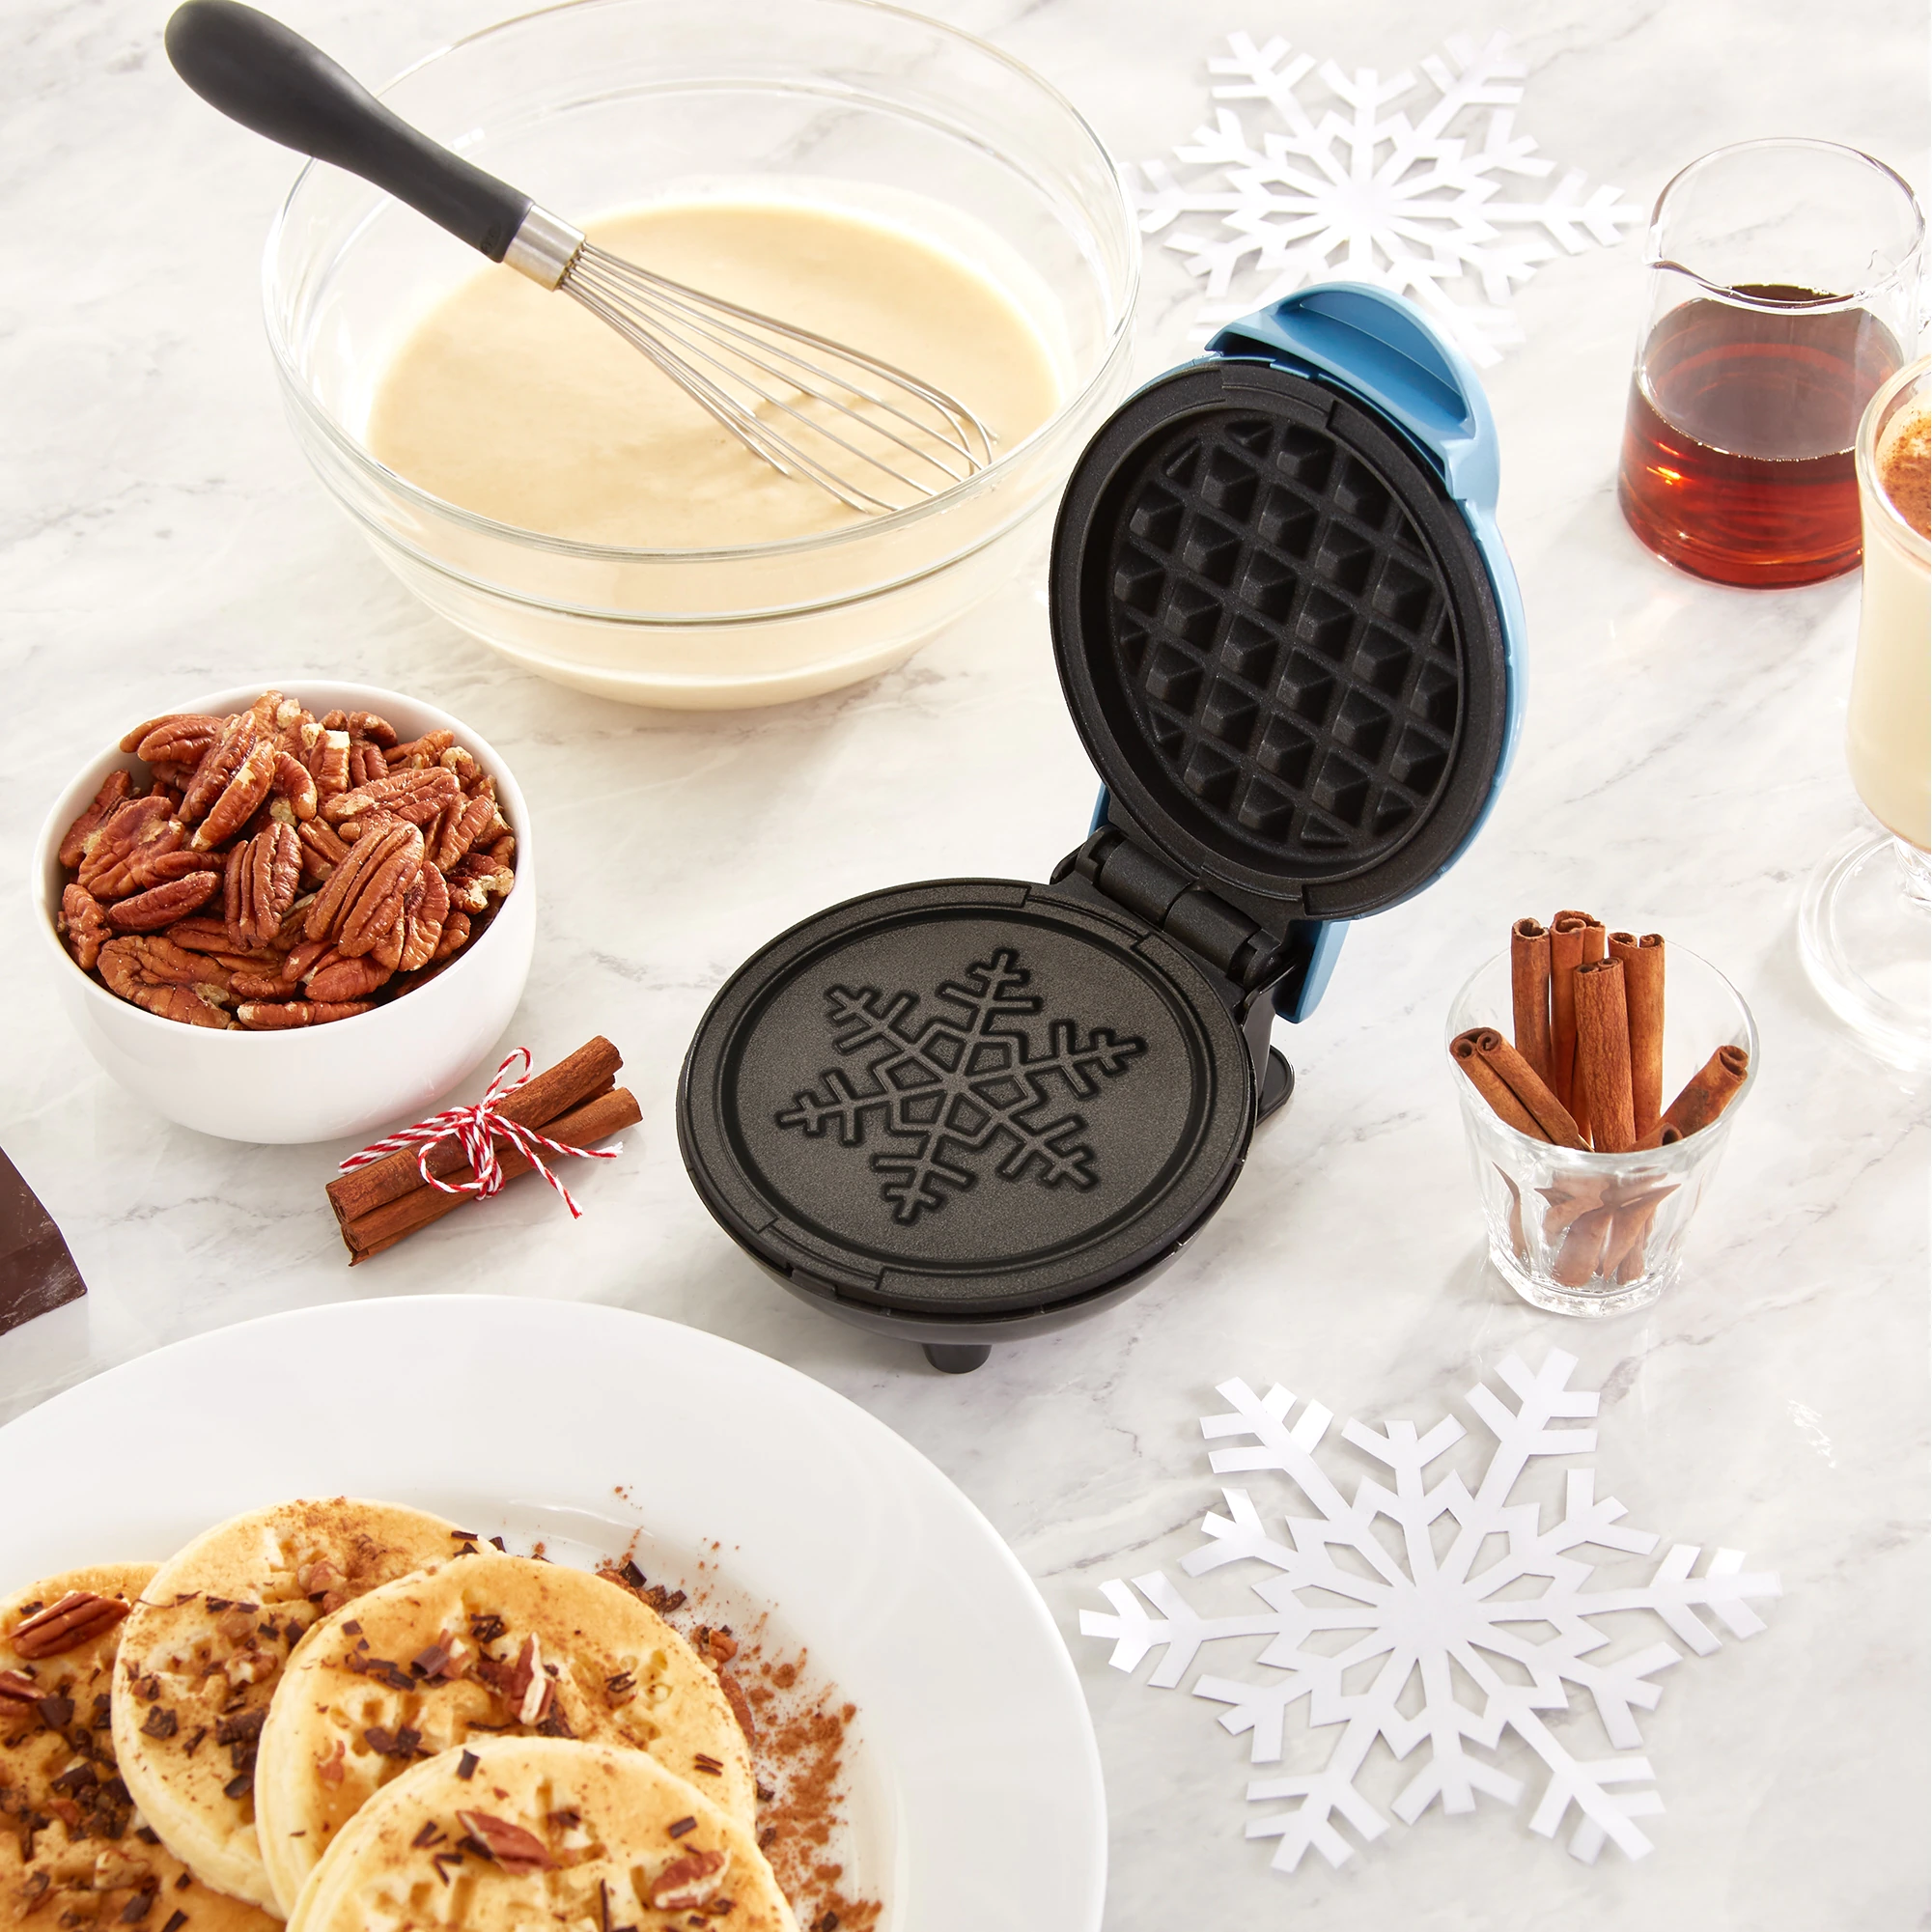 A small waffle maker next to a plate of fresh waffles